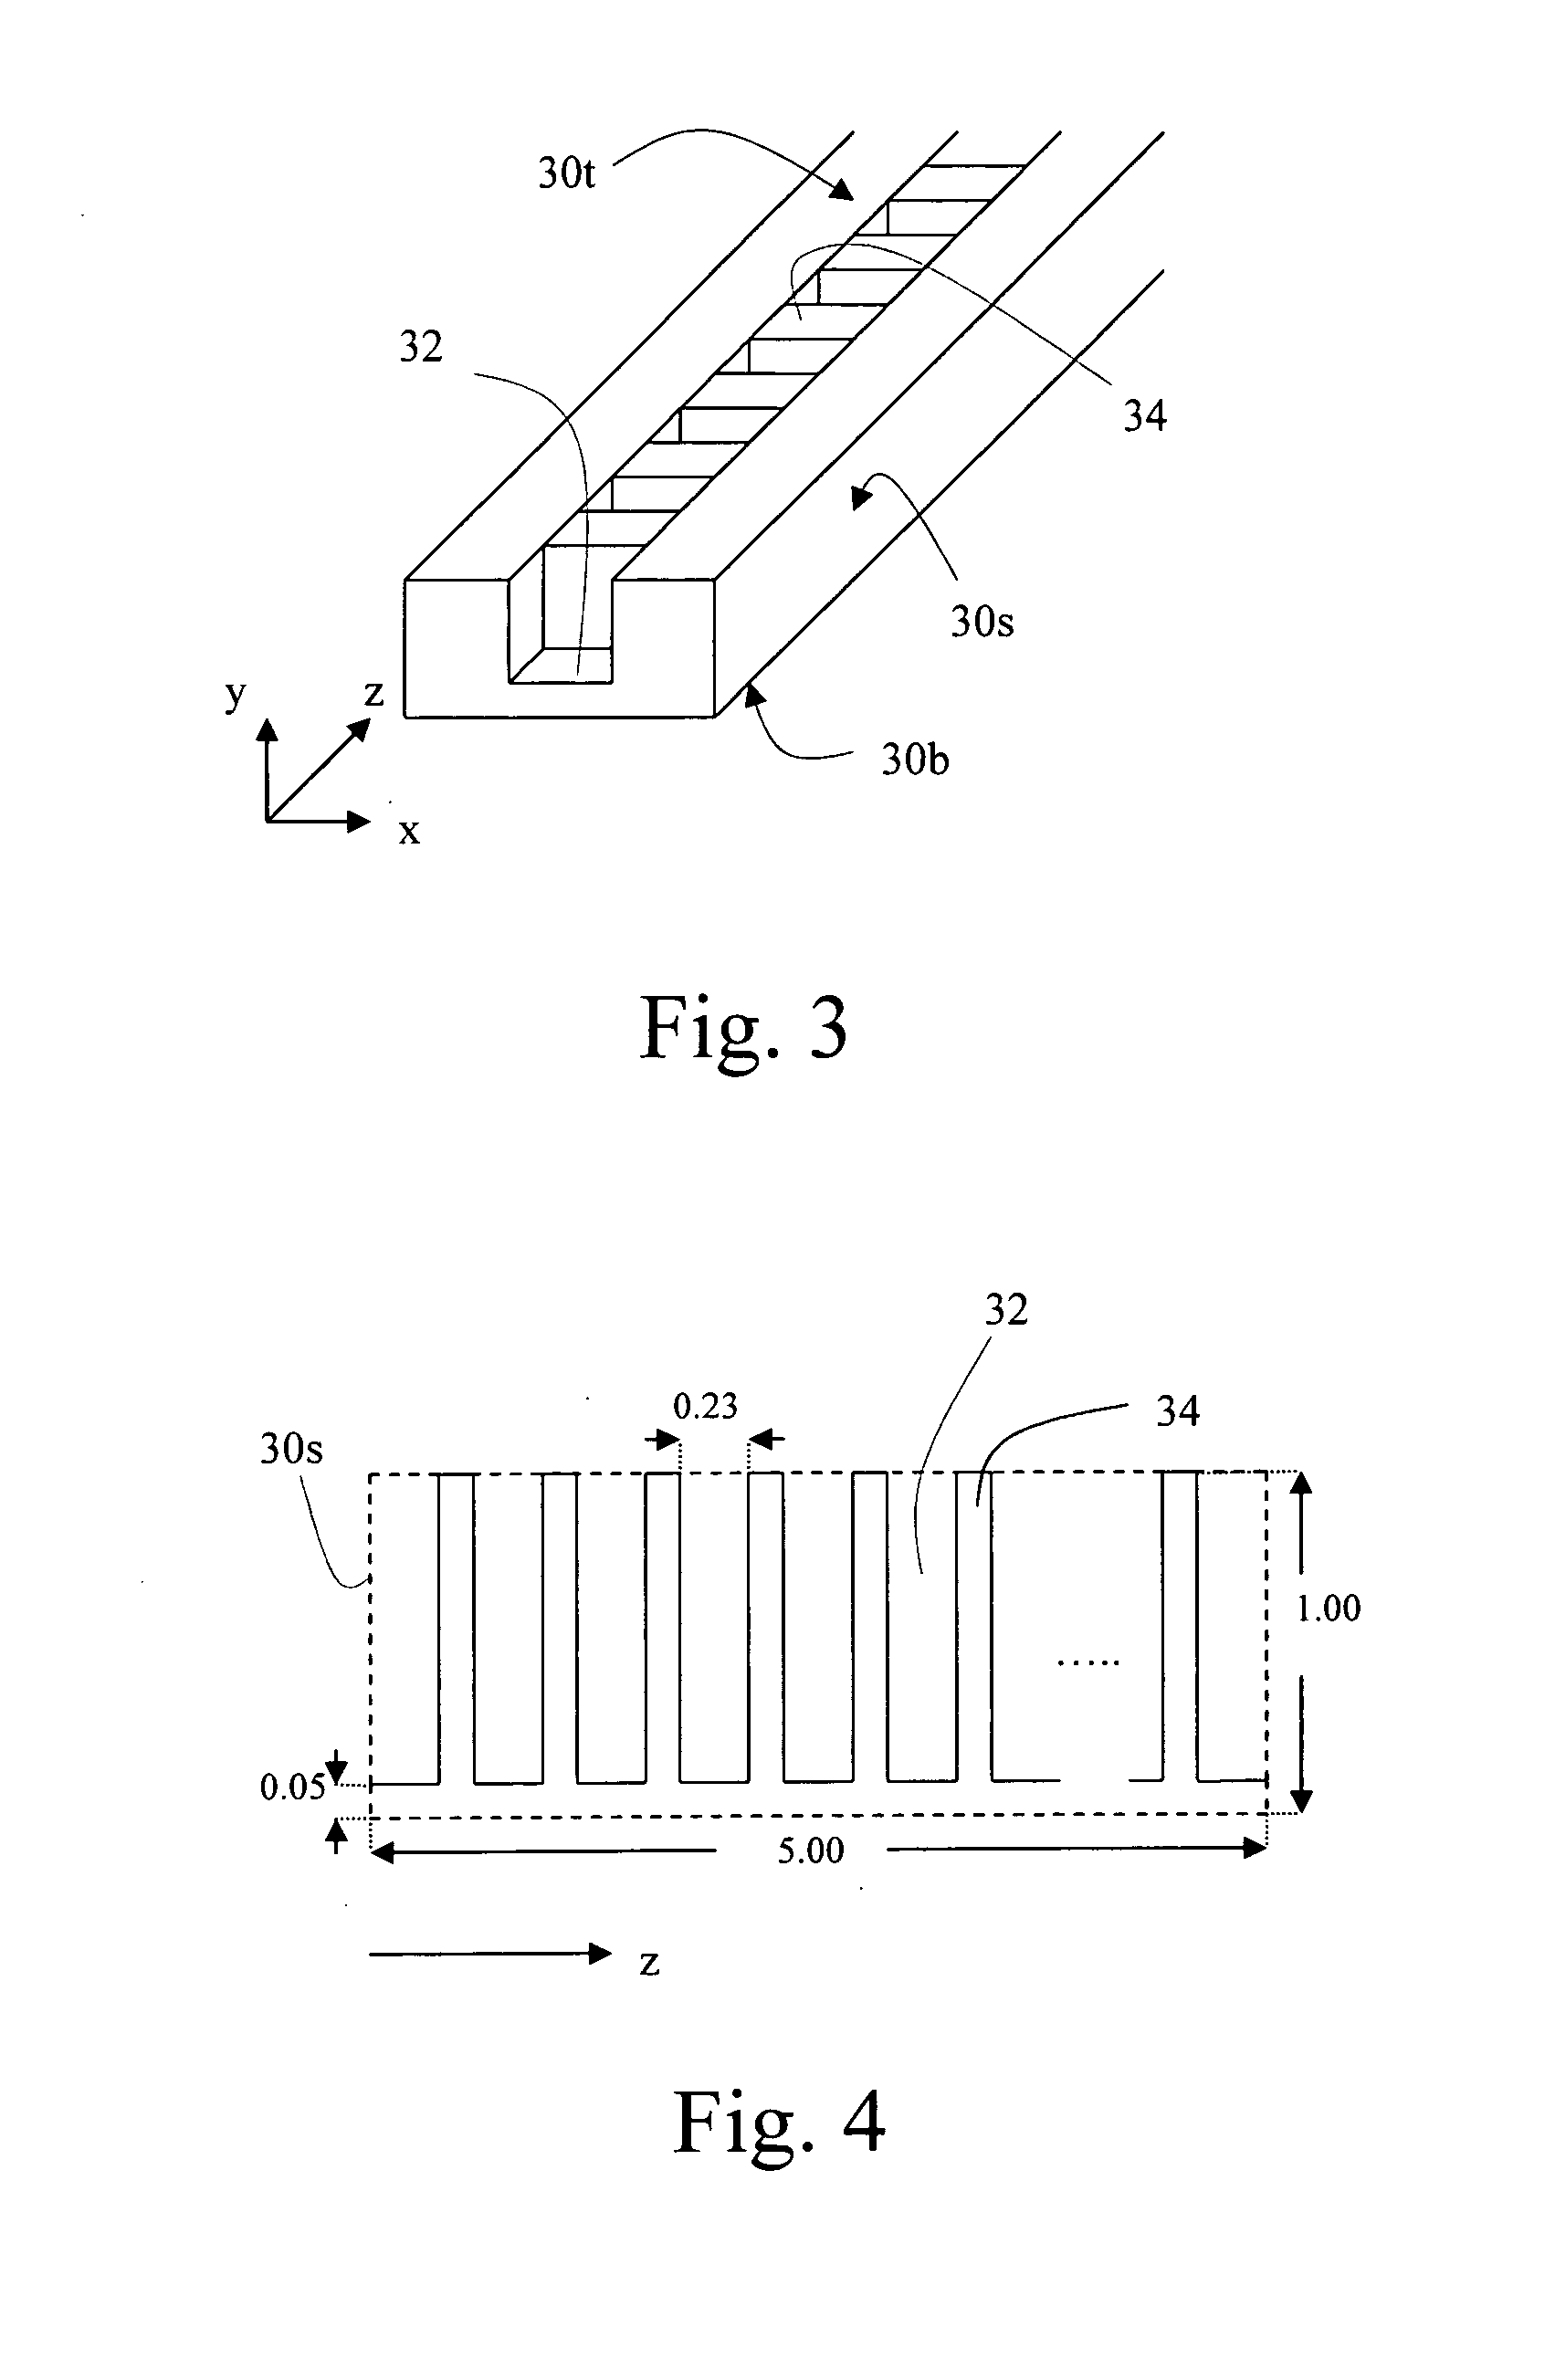 Slow-wave structure for ridge waveguide